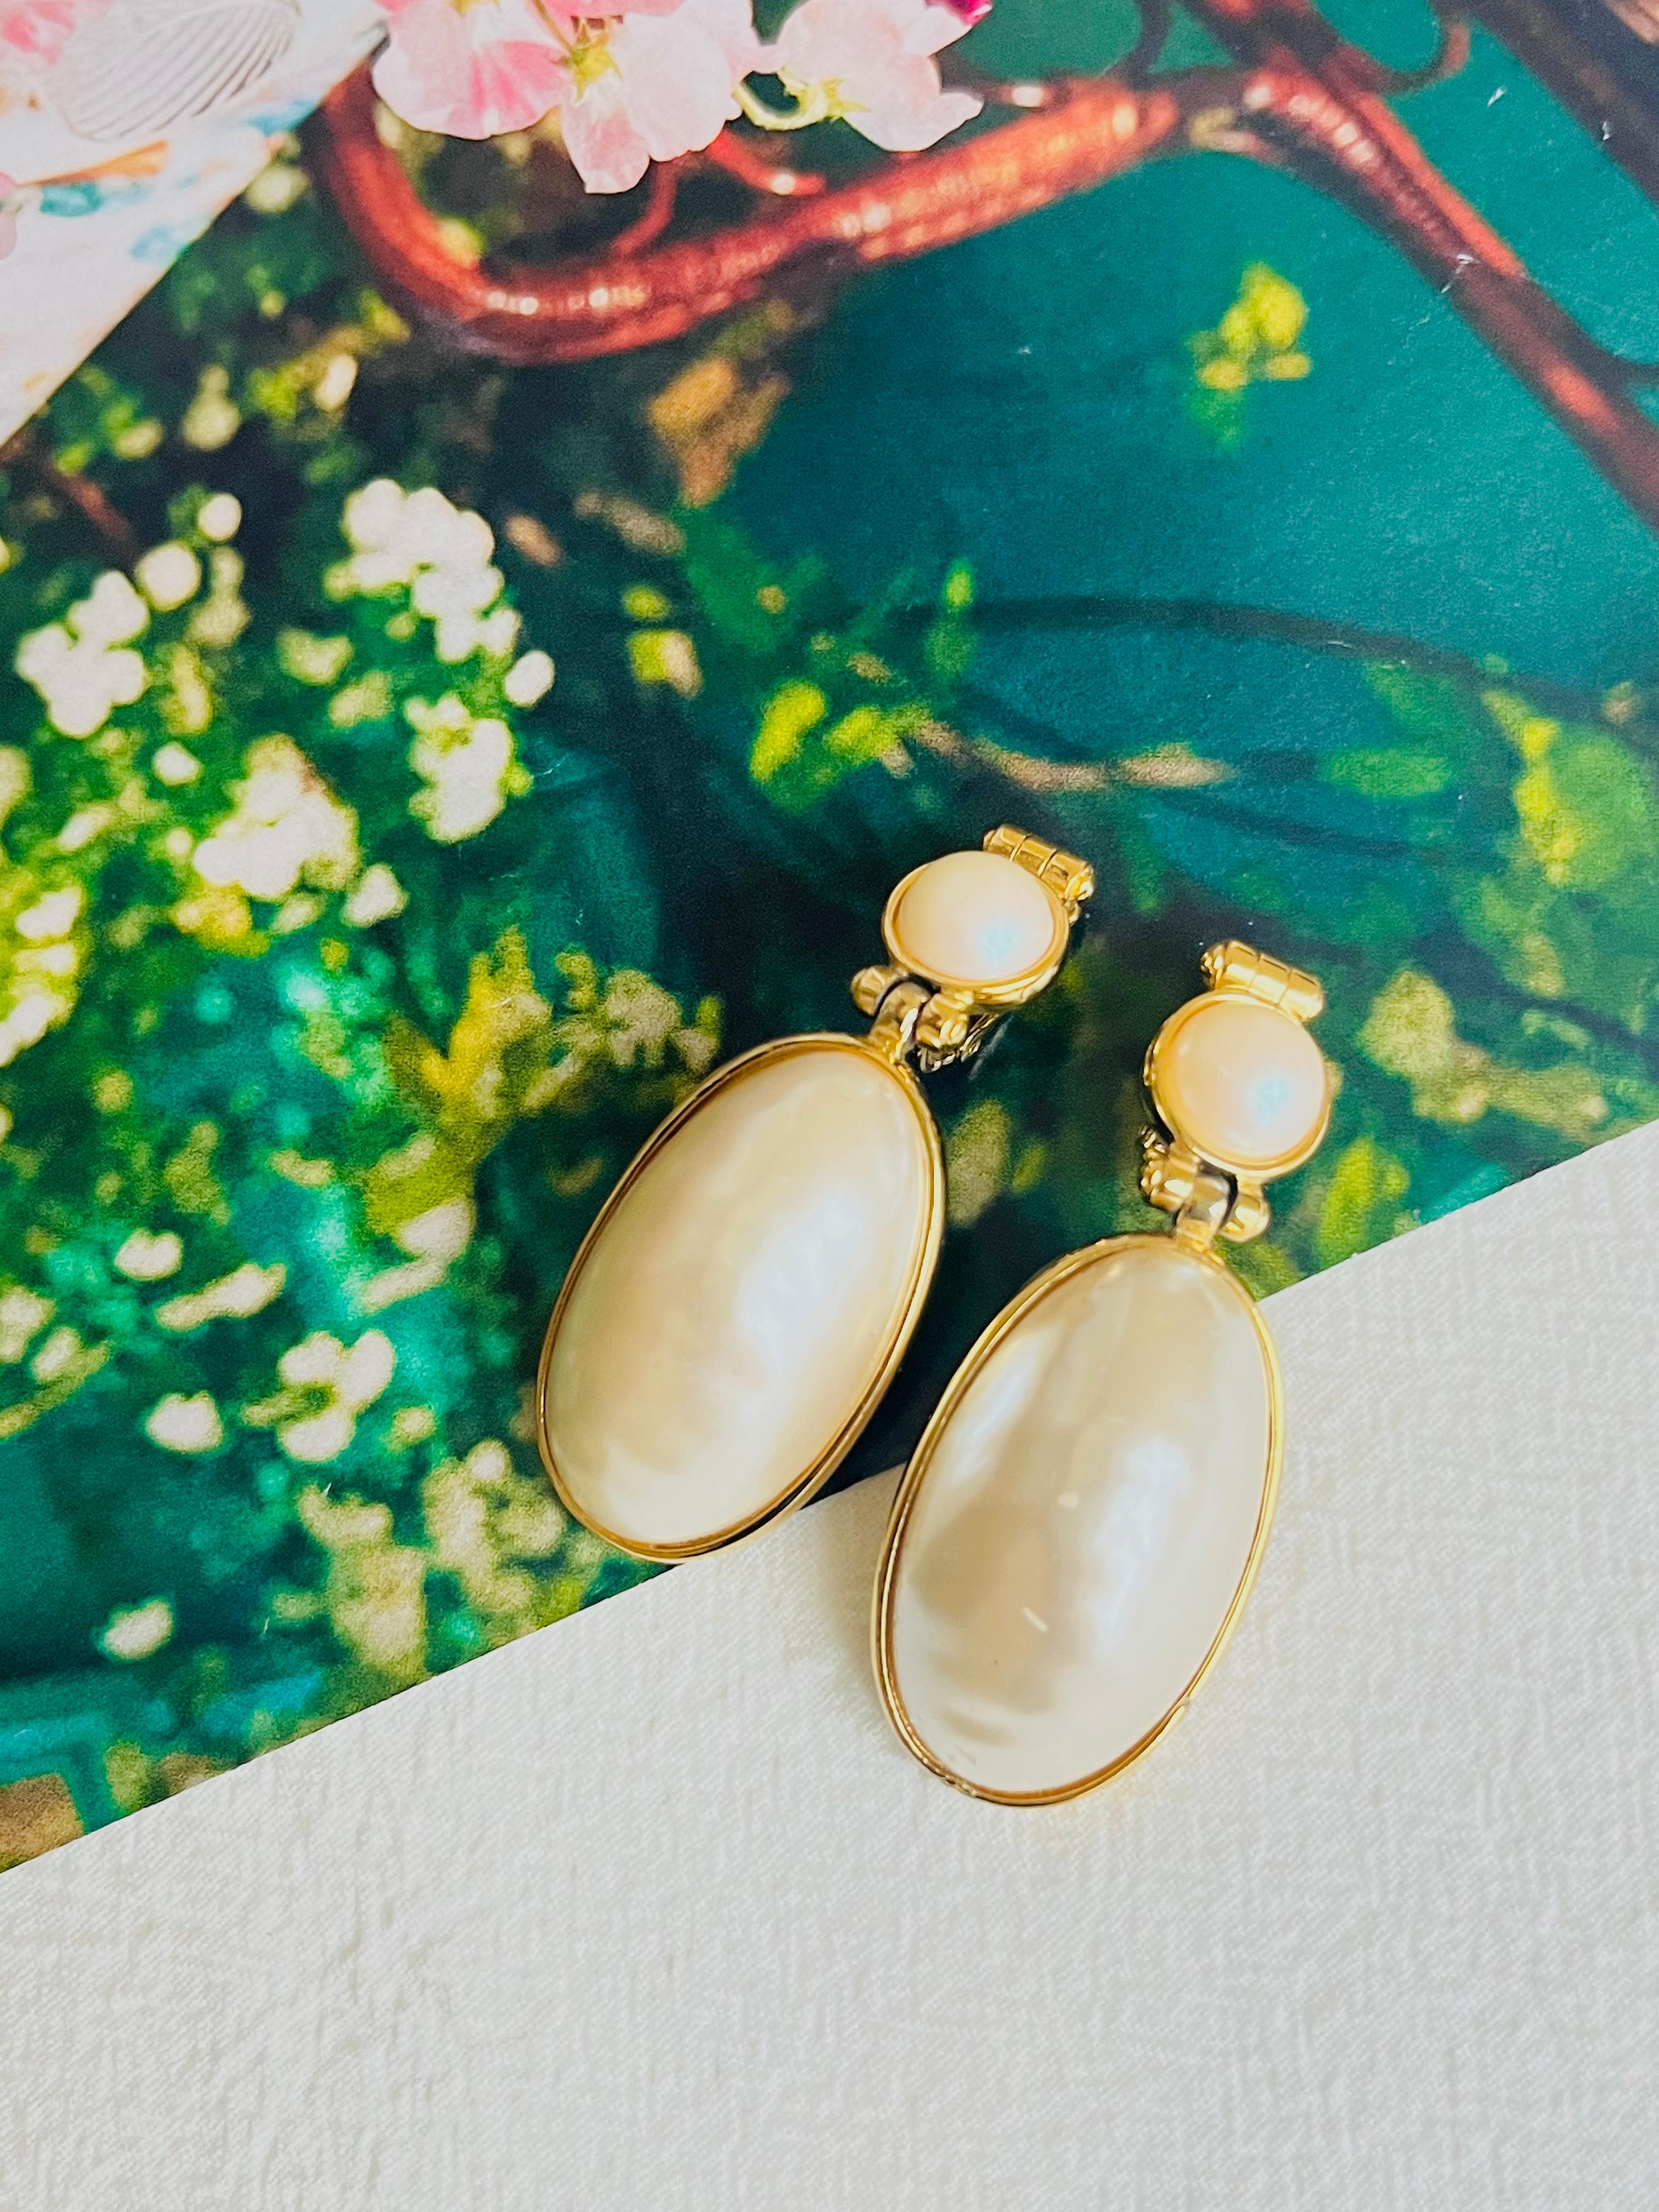 Givenchy Vintage Large White Oval Circle Pearl Elegant Drop Gold Clip Earrings  In Good Condition For Sale In Wokingham, England